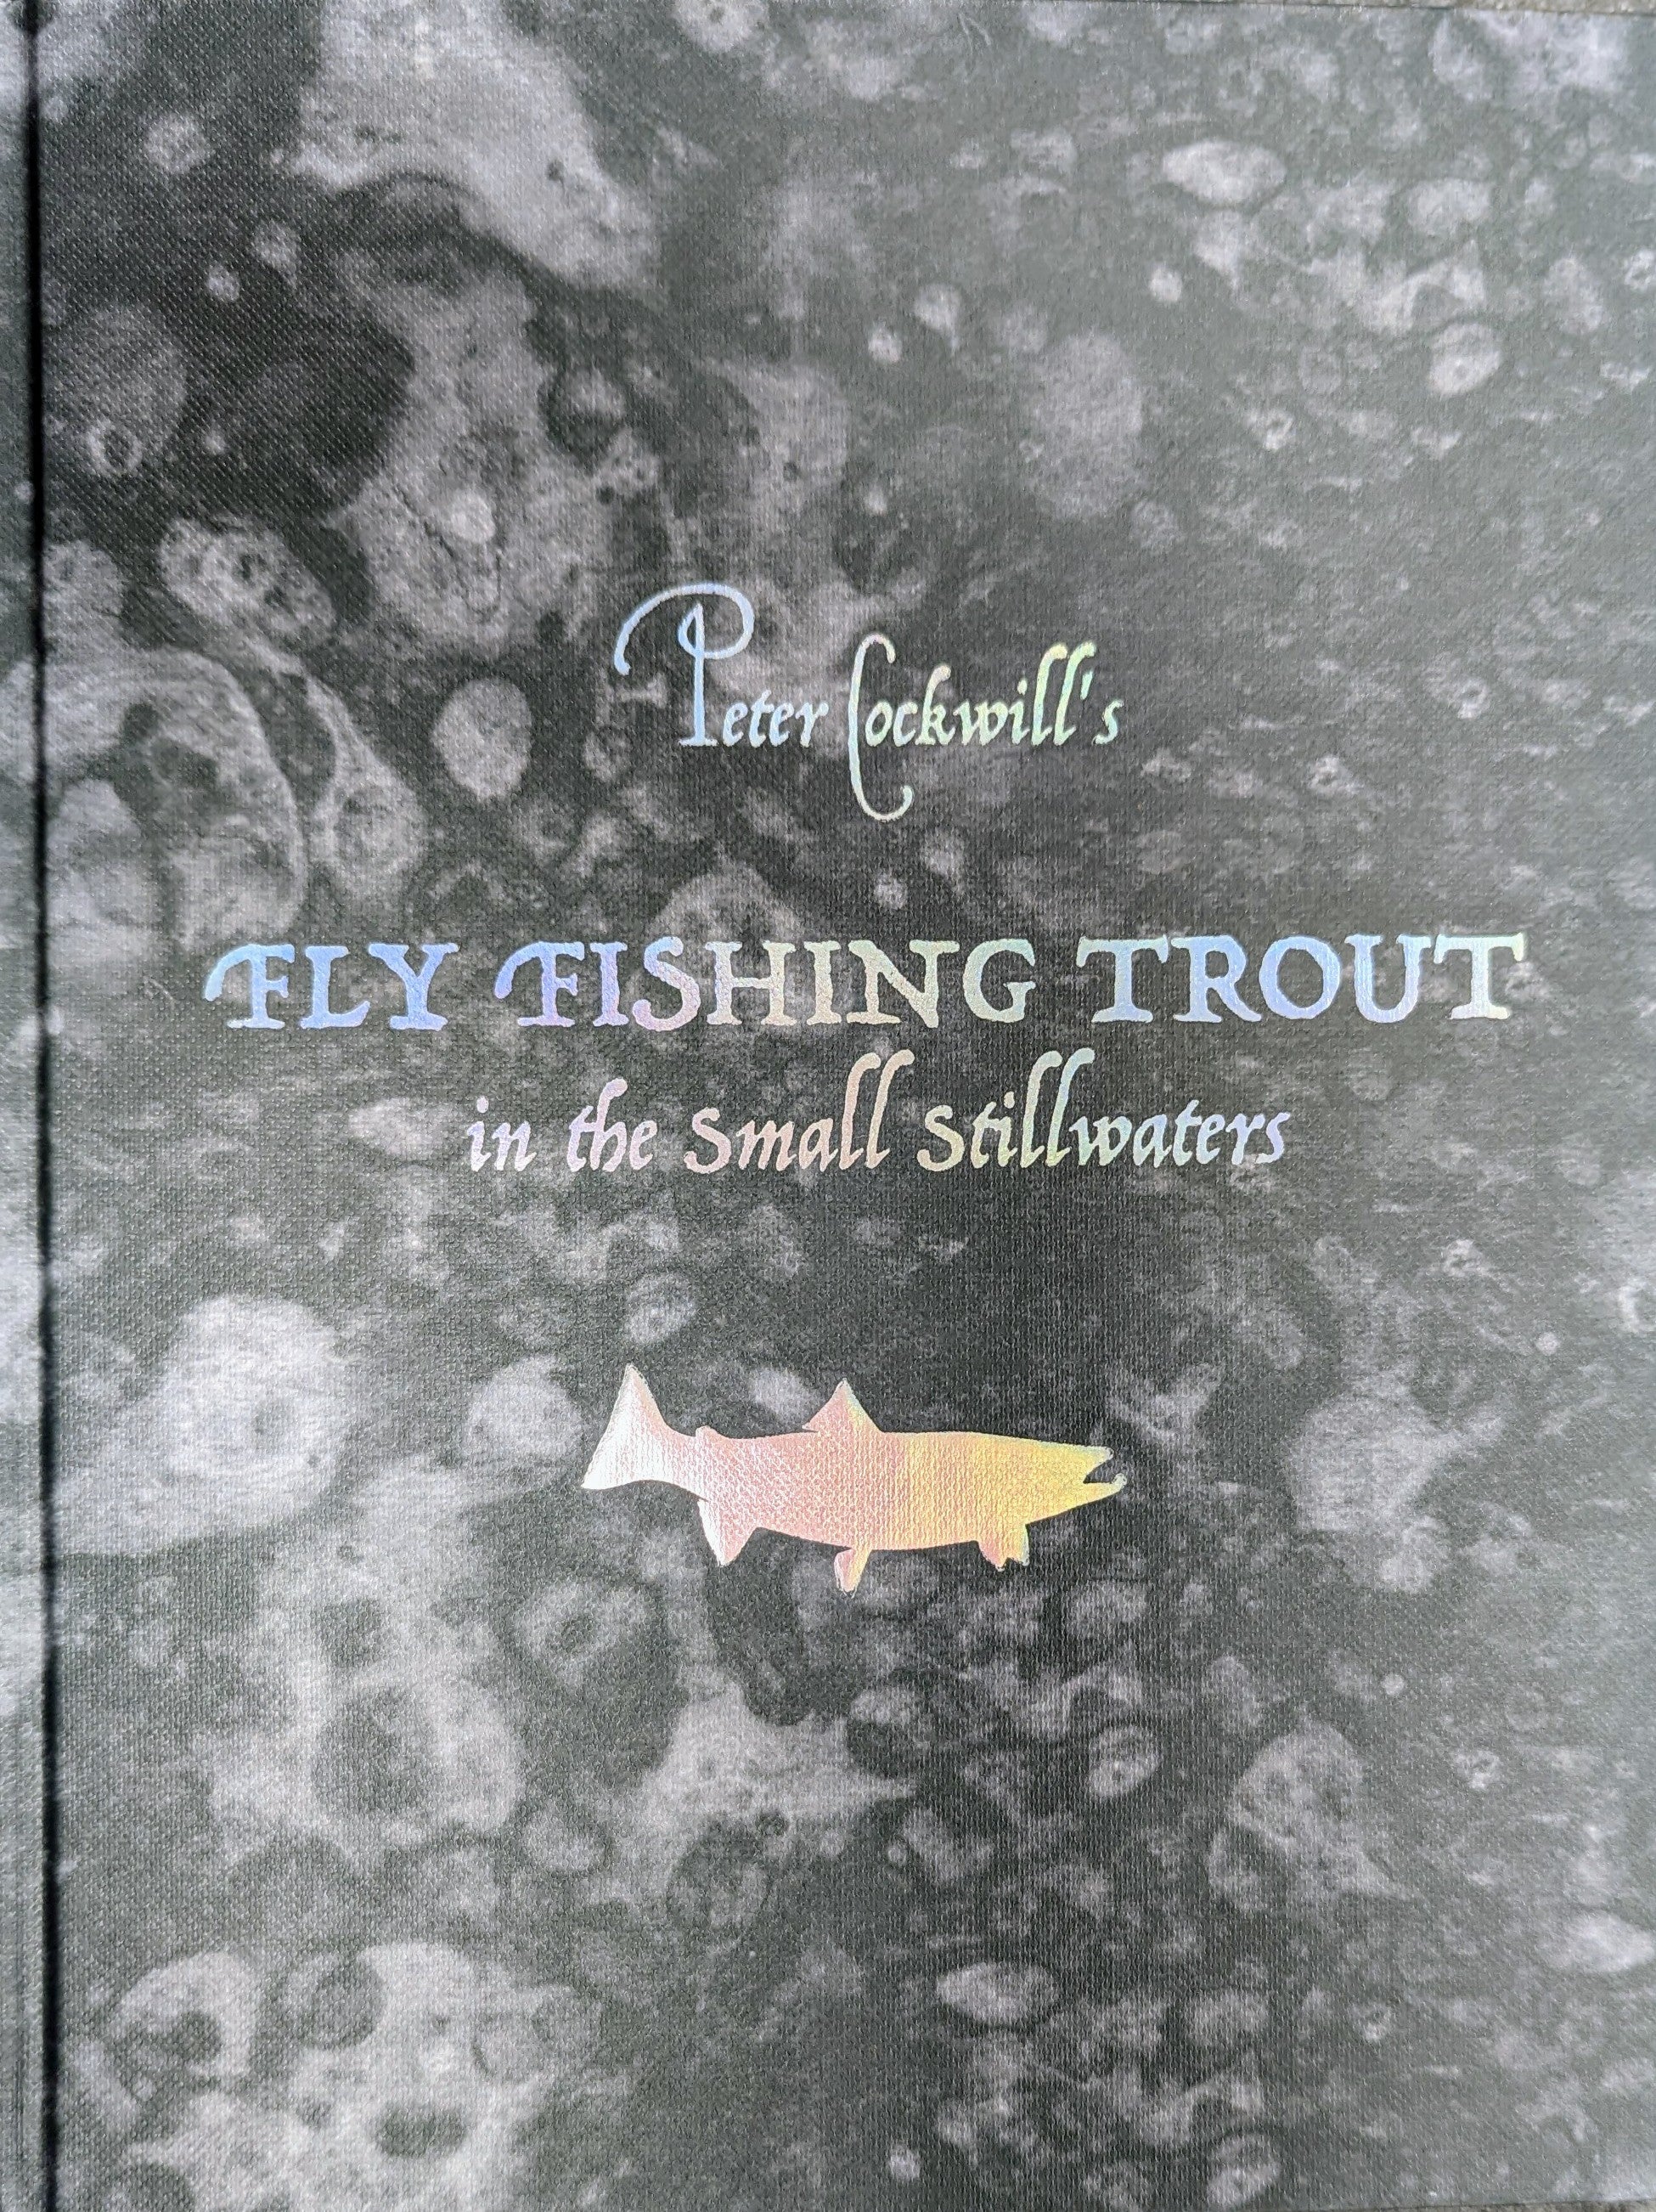 FLY FISHING TROUT IN THE SMALL STILLWATERS - PETER COCKWILL